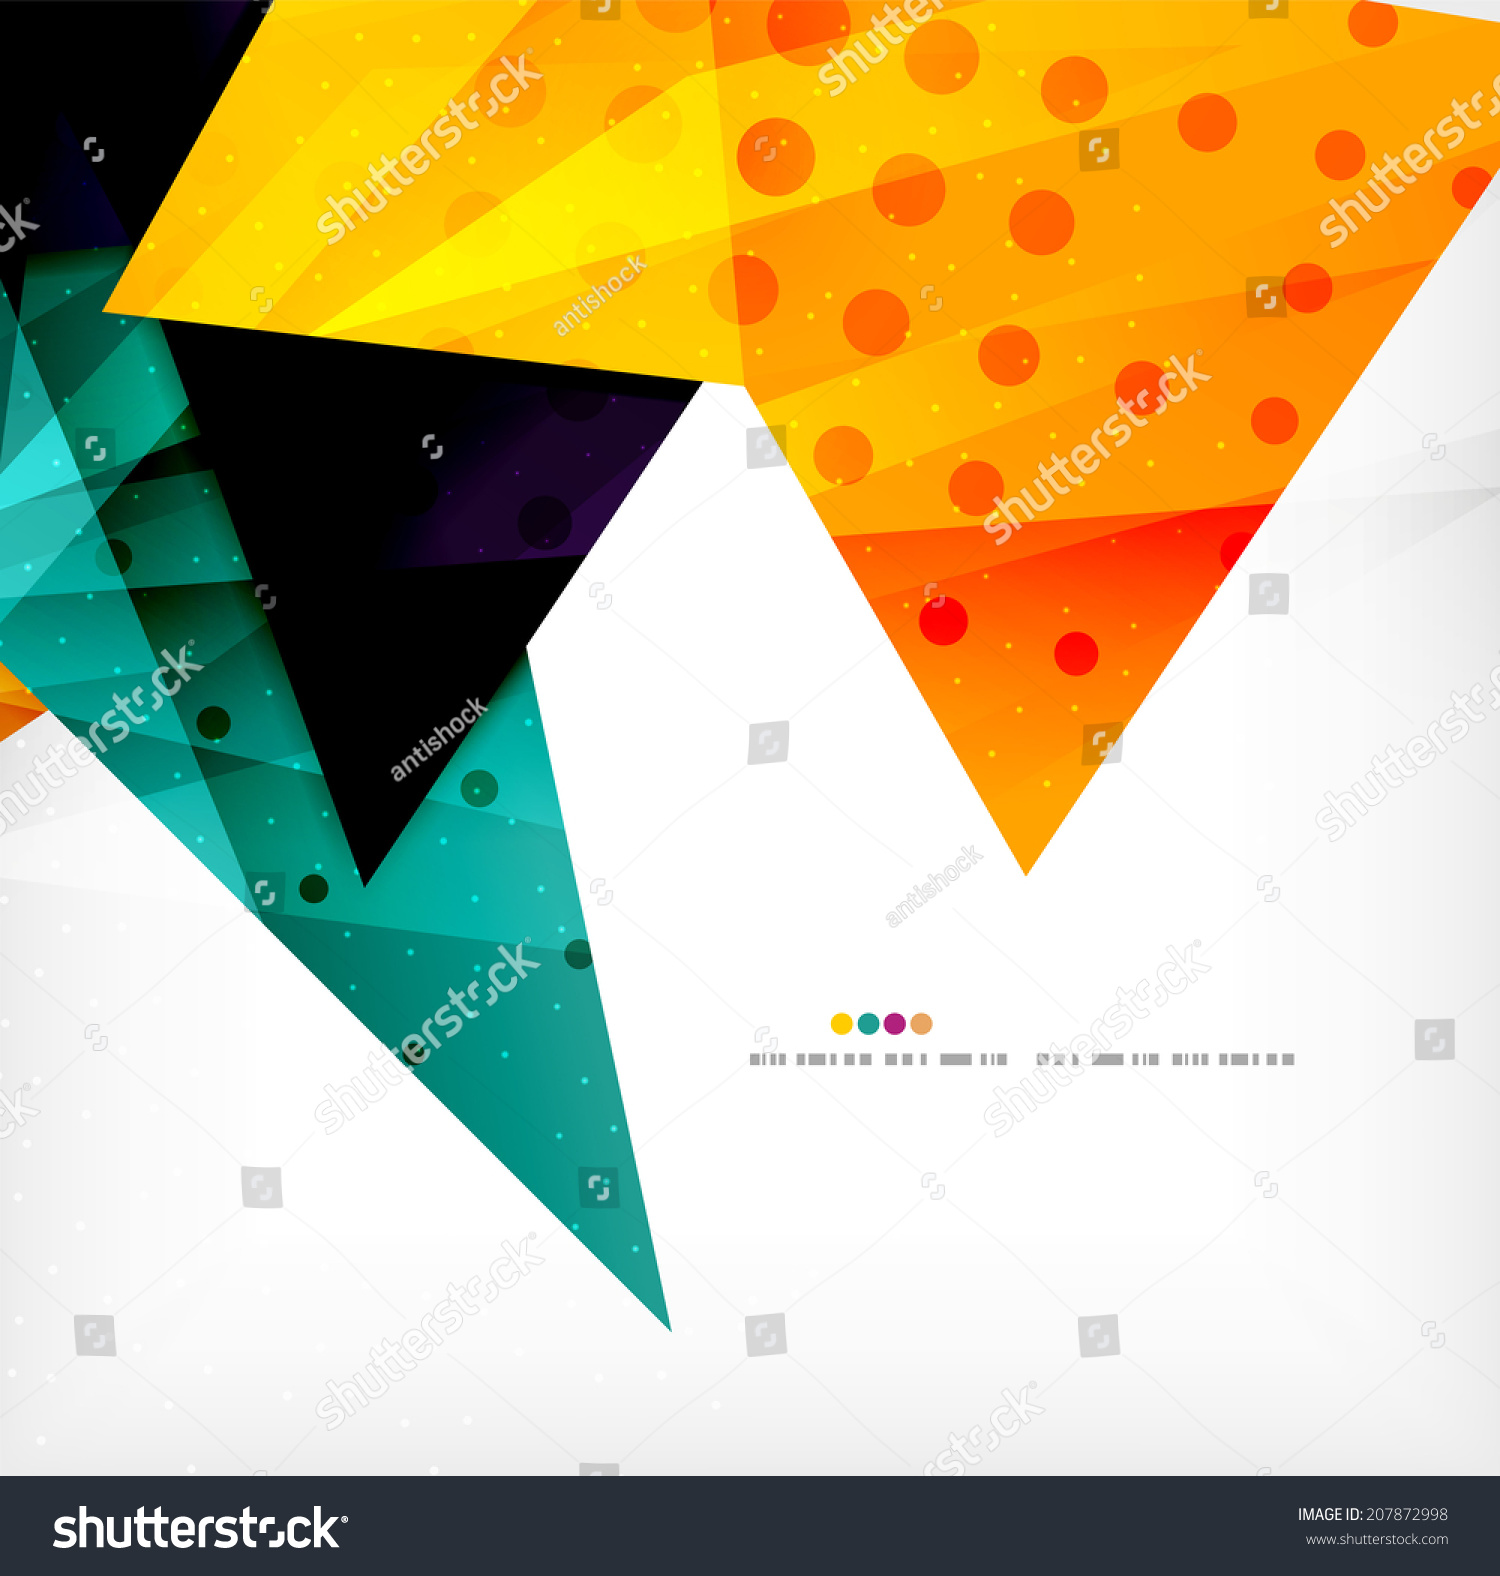 Modern 3d glossy overlapping triangles in different colors with texture and light effects. Business brochure background design with copyspace #207872998